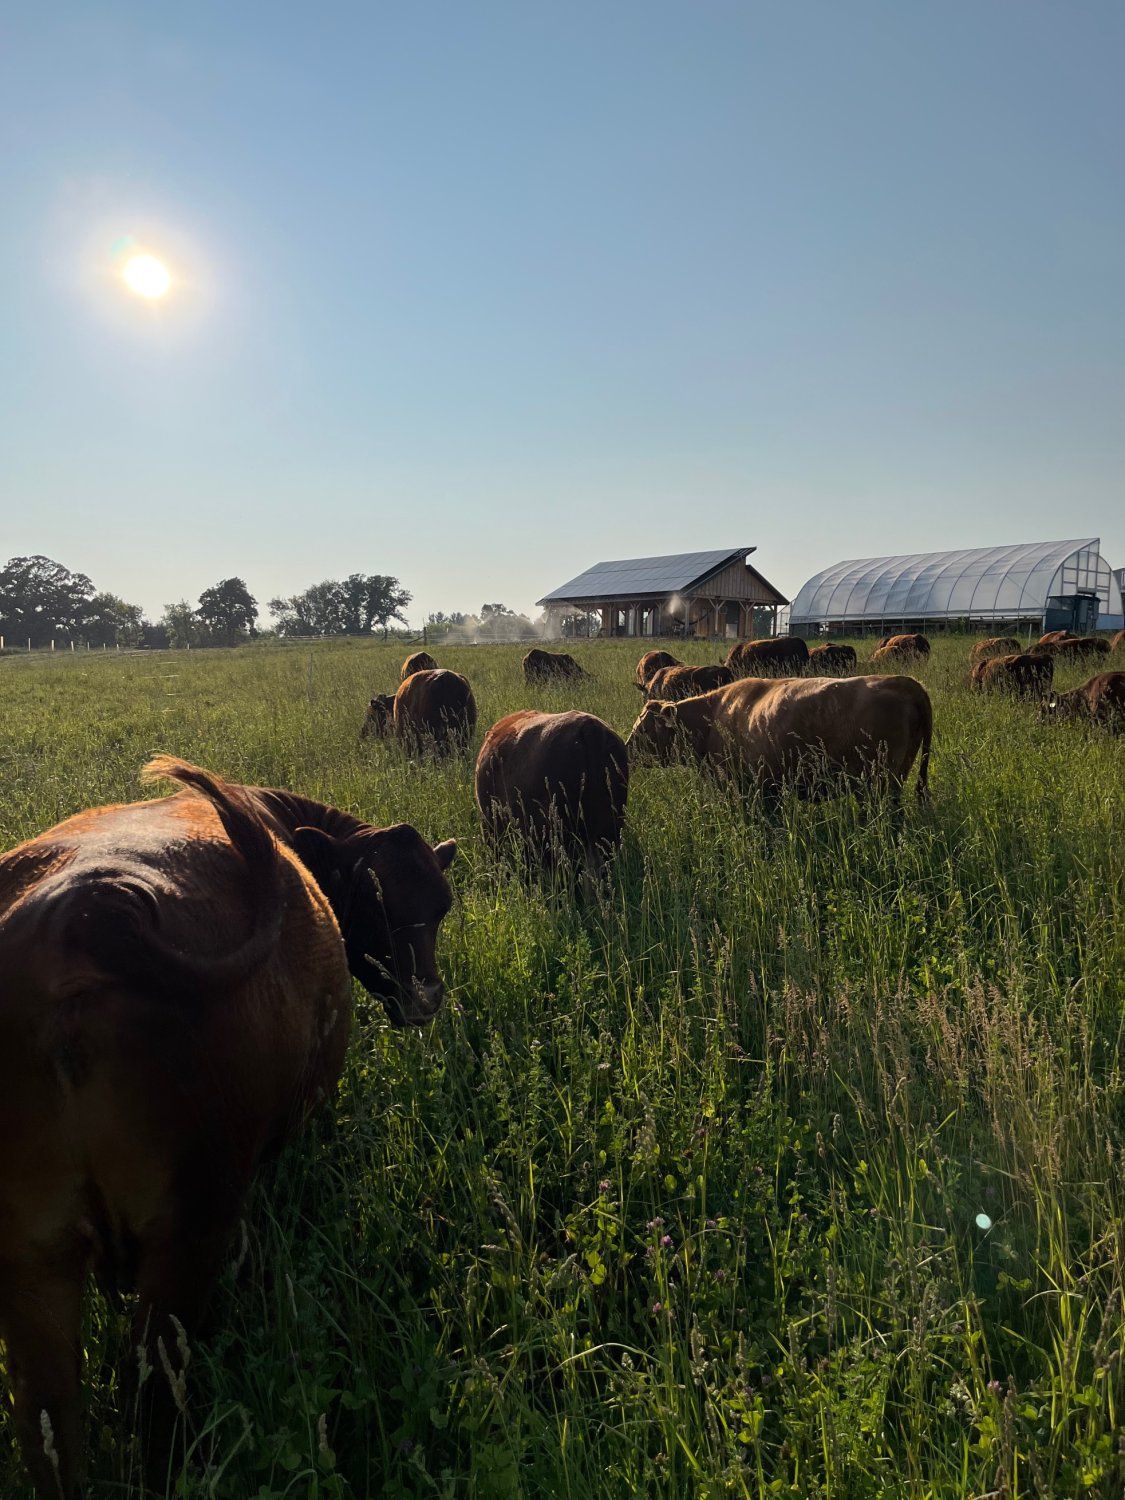 Next Happening: Sunny Cows